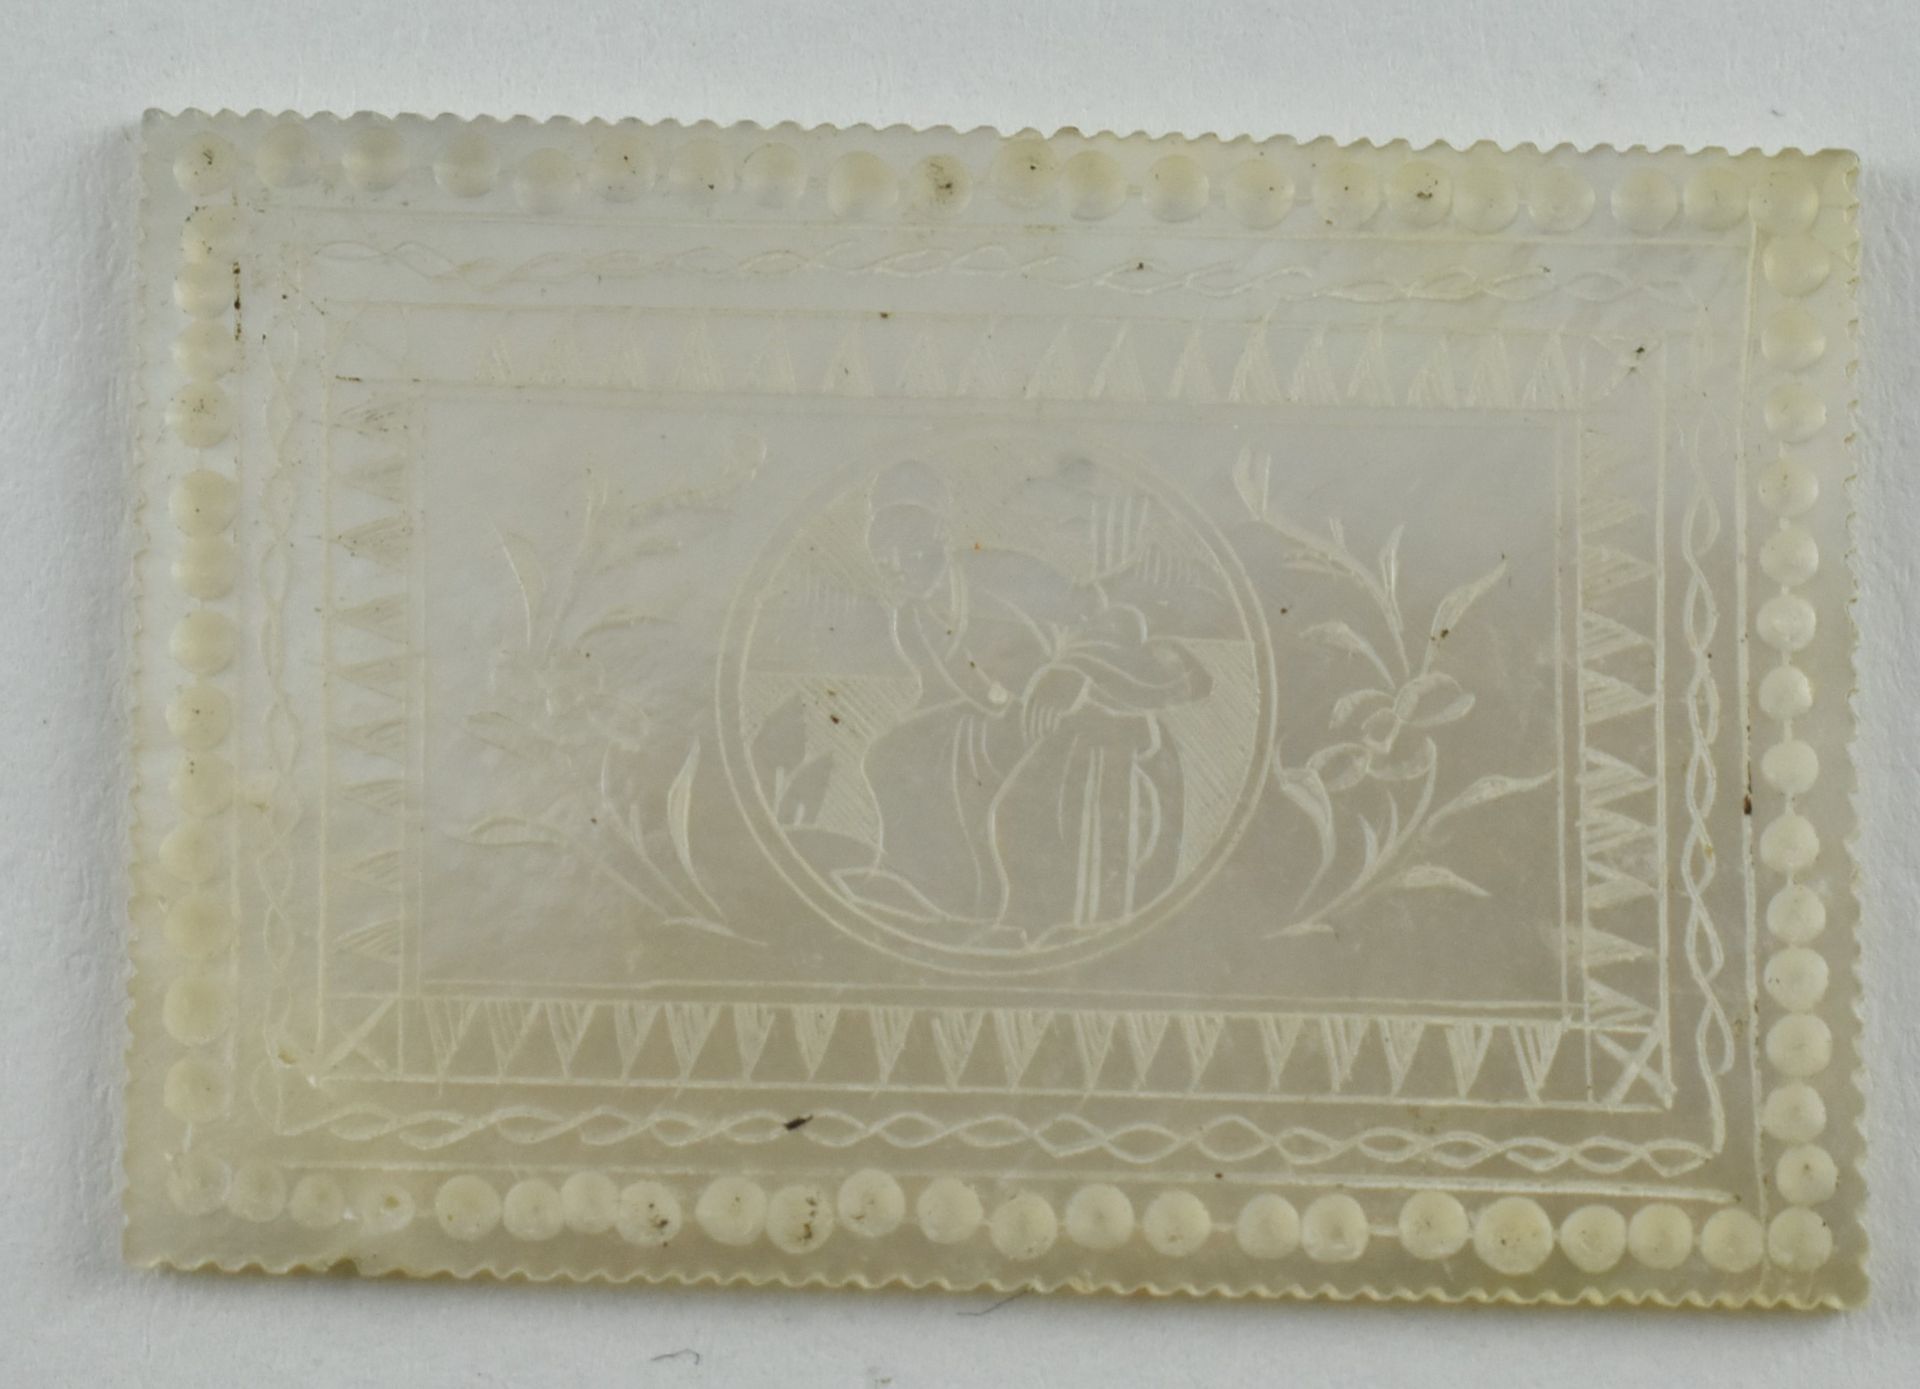 QING DYNASTY MOTHER OF PEARL GAMING TOKENS 清十三行贝母筹码 - Image 6 of 11